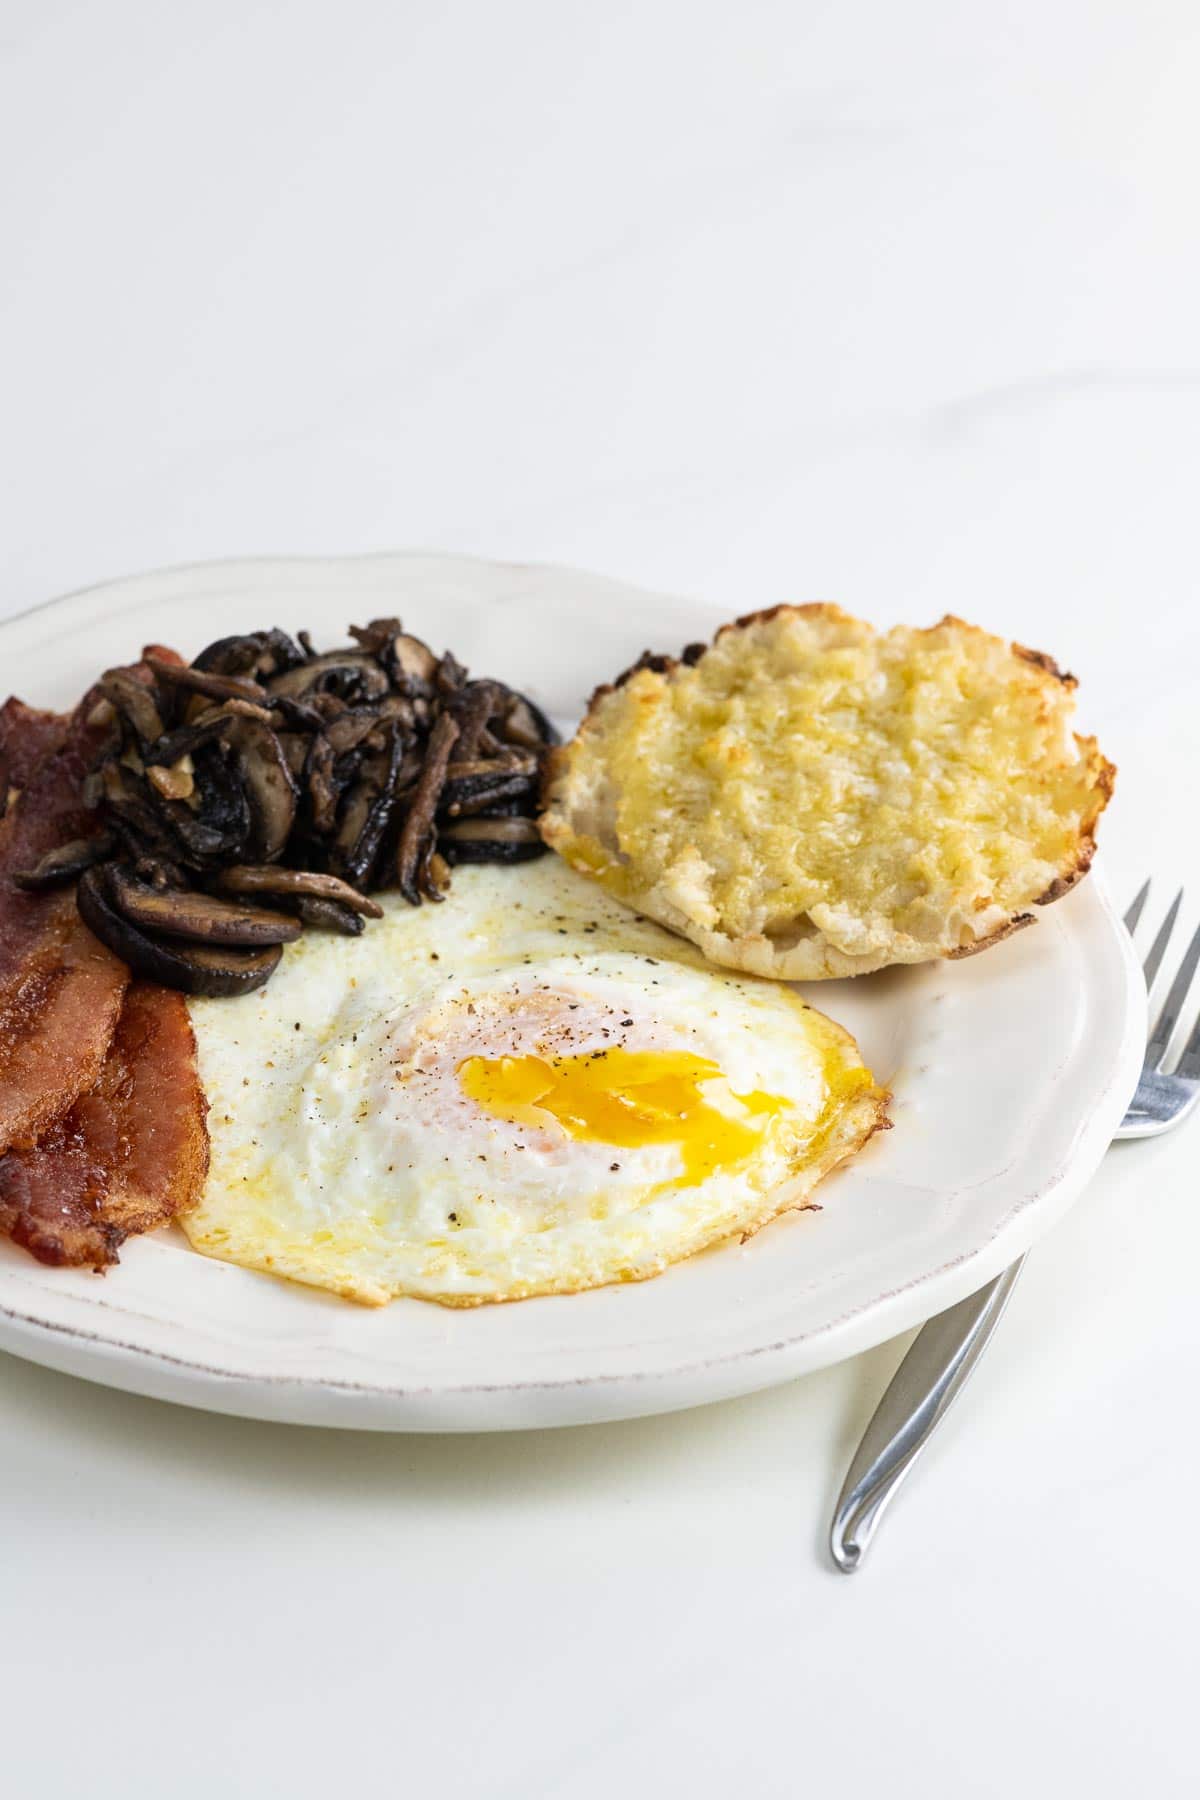 a fried egg over medium with bacon, sauteed mushrooms, and half an english muffin on a plate with a fork